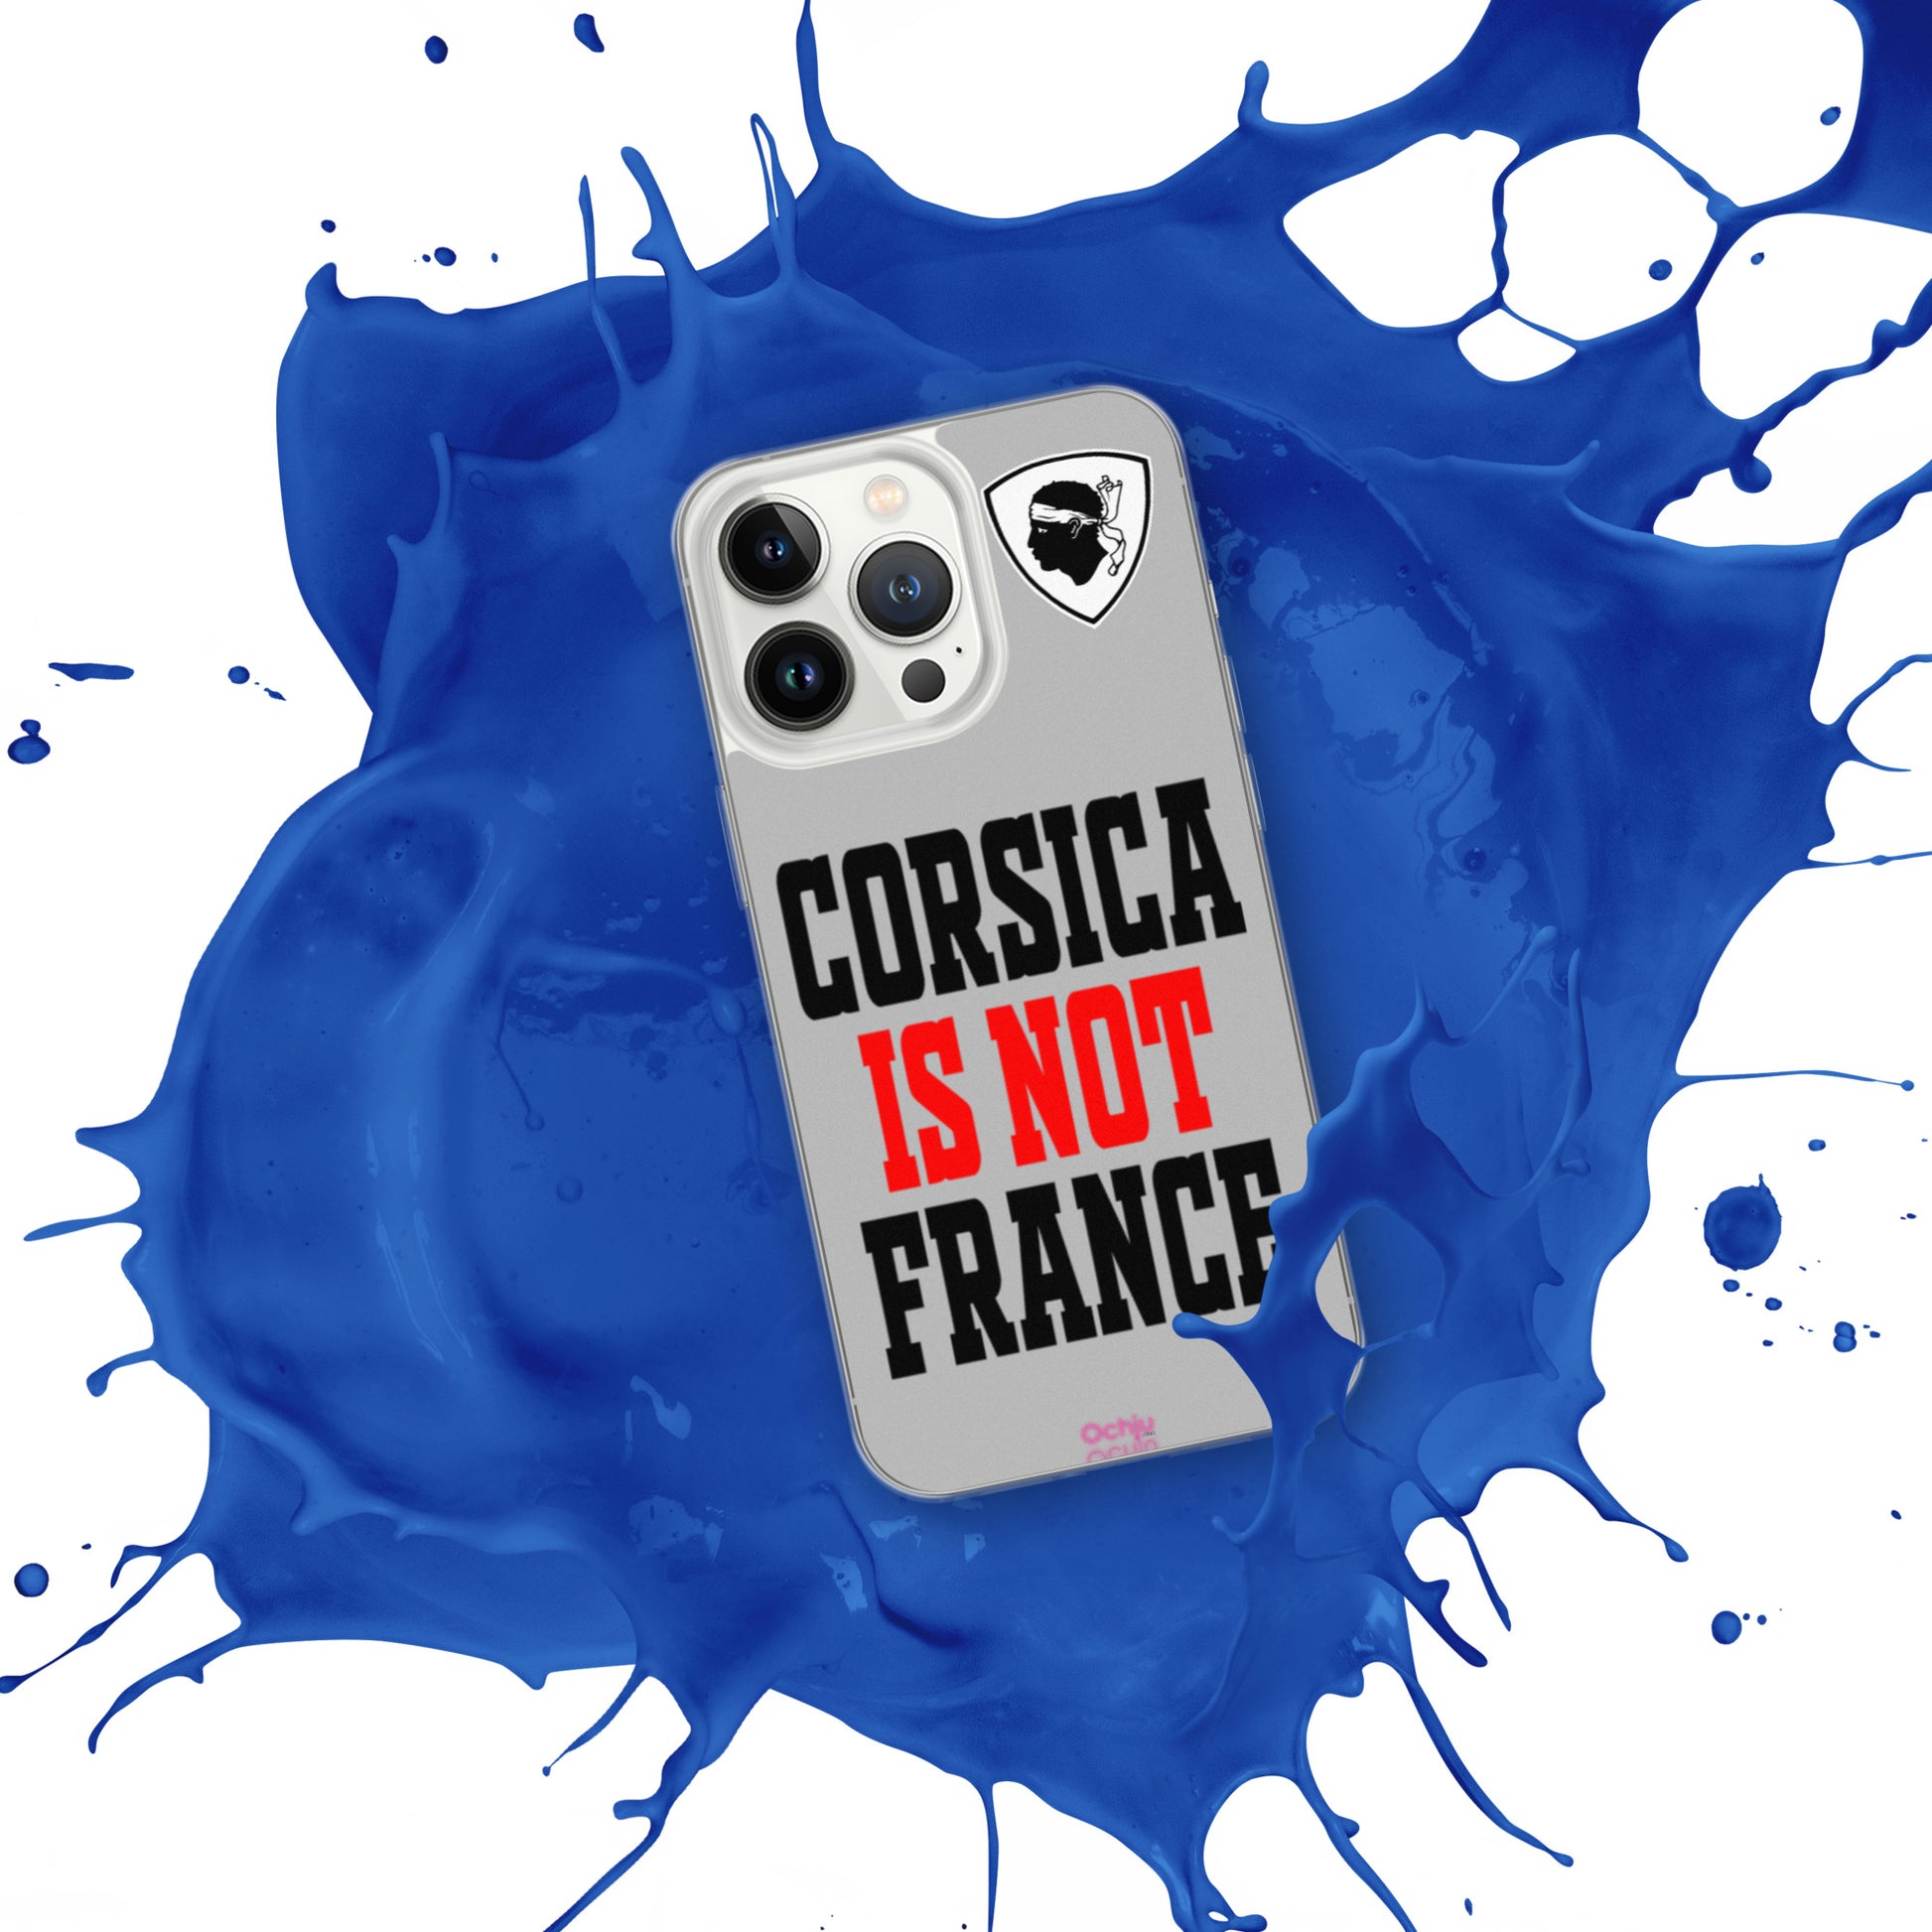 Coque pour iPhone Corsica is not France - Ochju Ochju iPhone 13 Pro Ochju Coque pour iPhone Corsica is not France